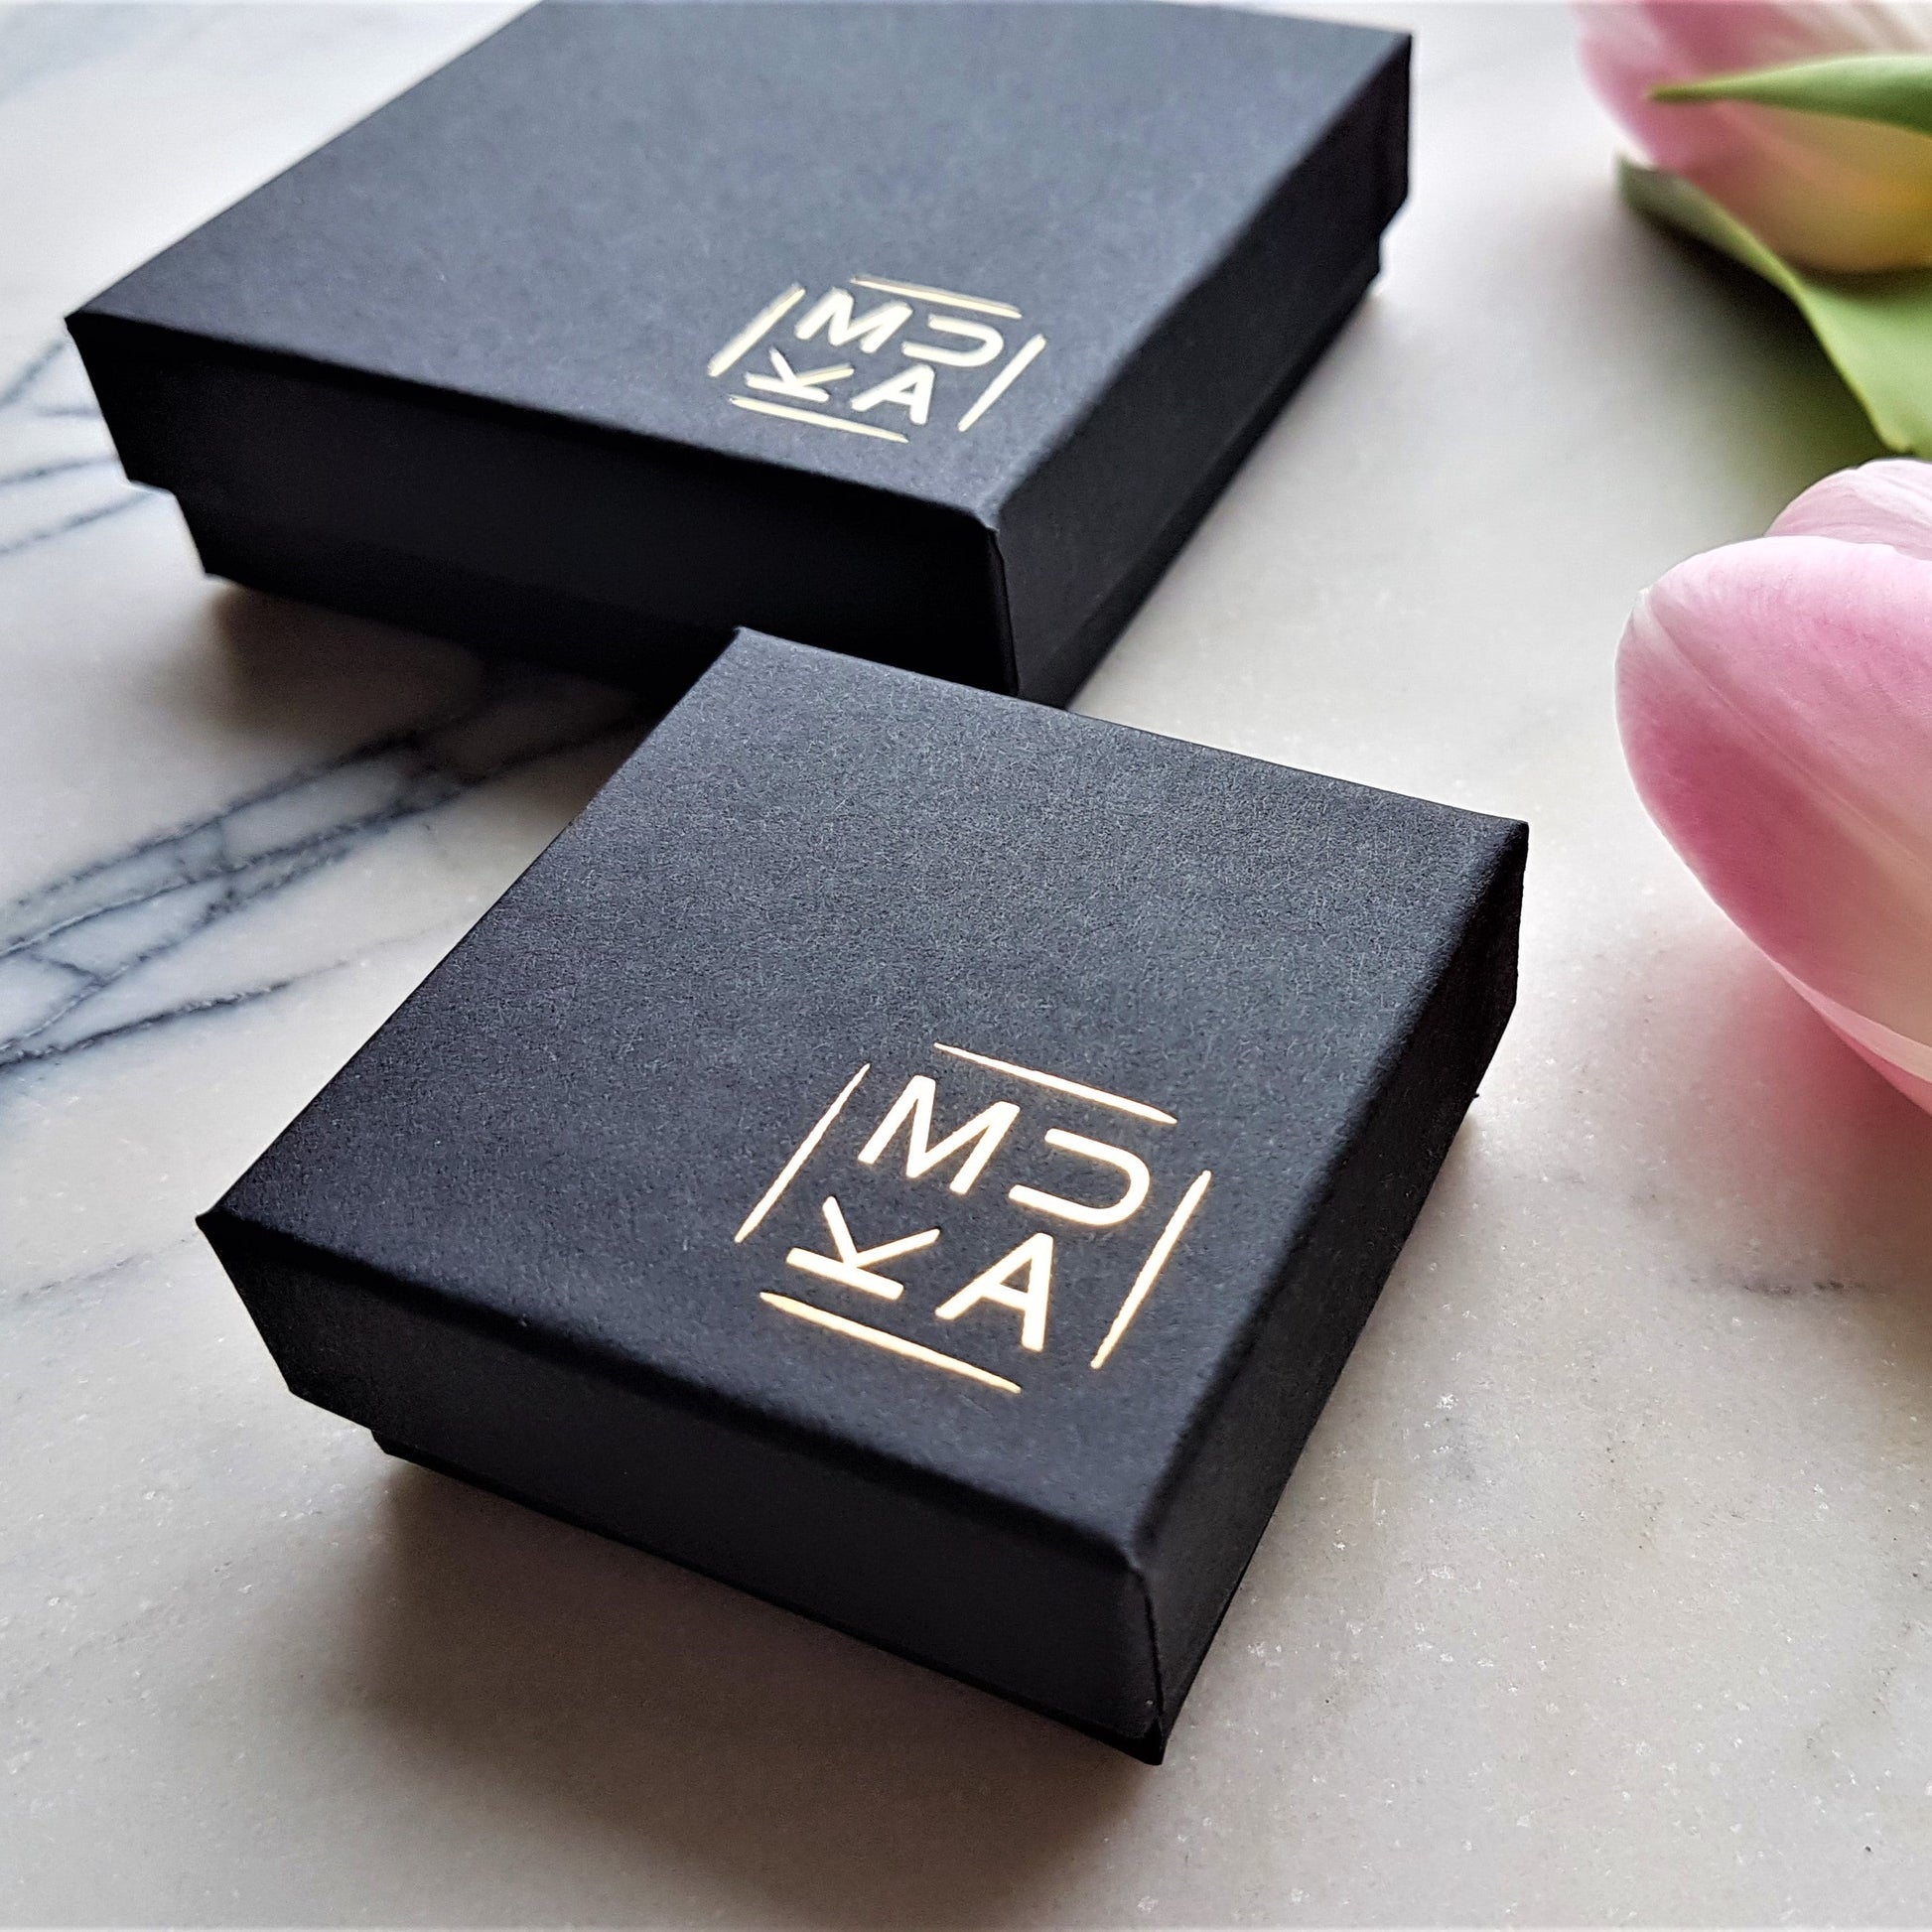 MUKA branded jewellery boxes, black box with gold logo